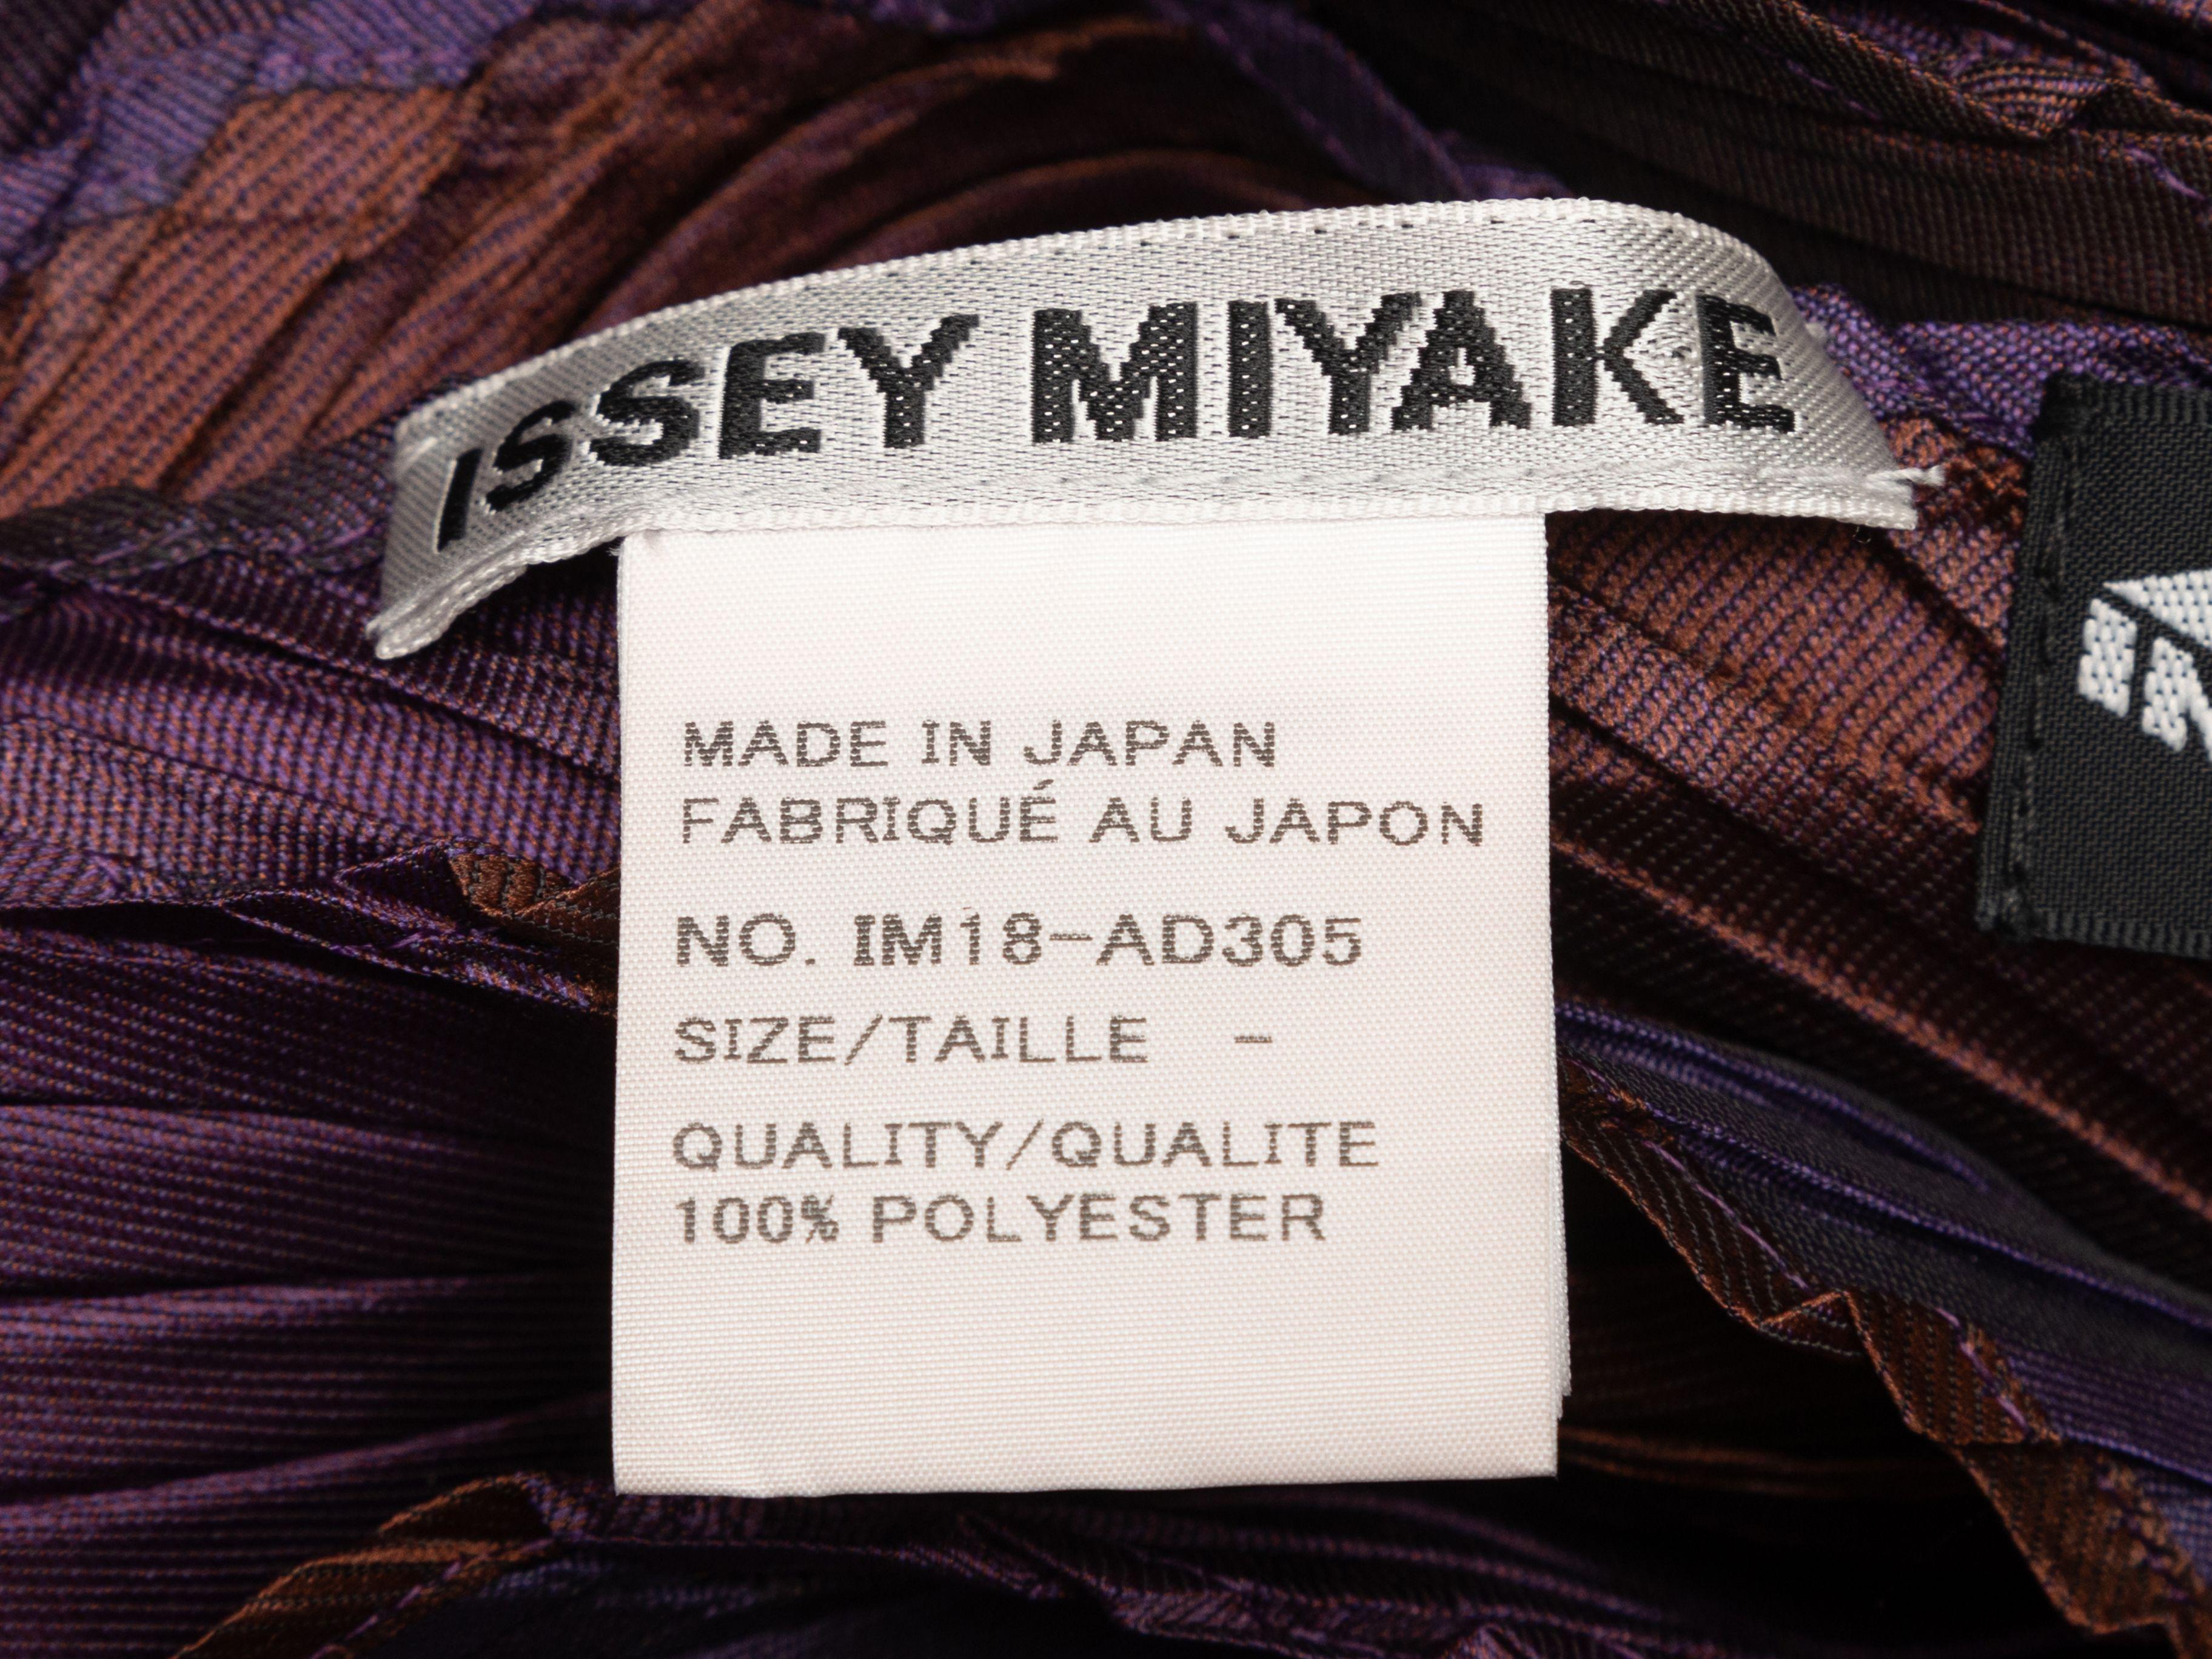 Product Details: Purple and brown plisse scarf by Issey Miyake. 59